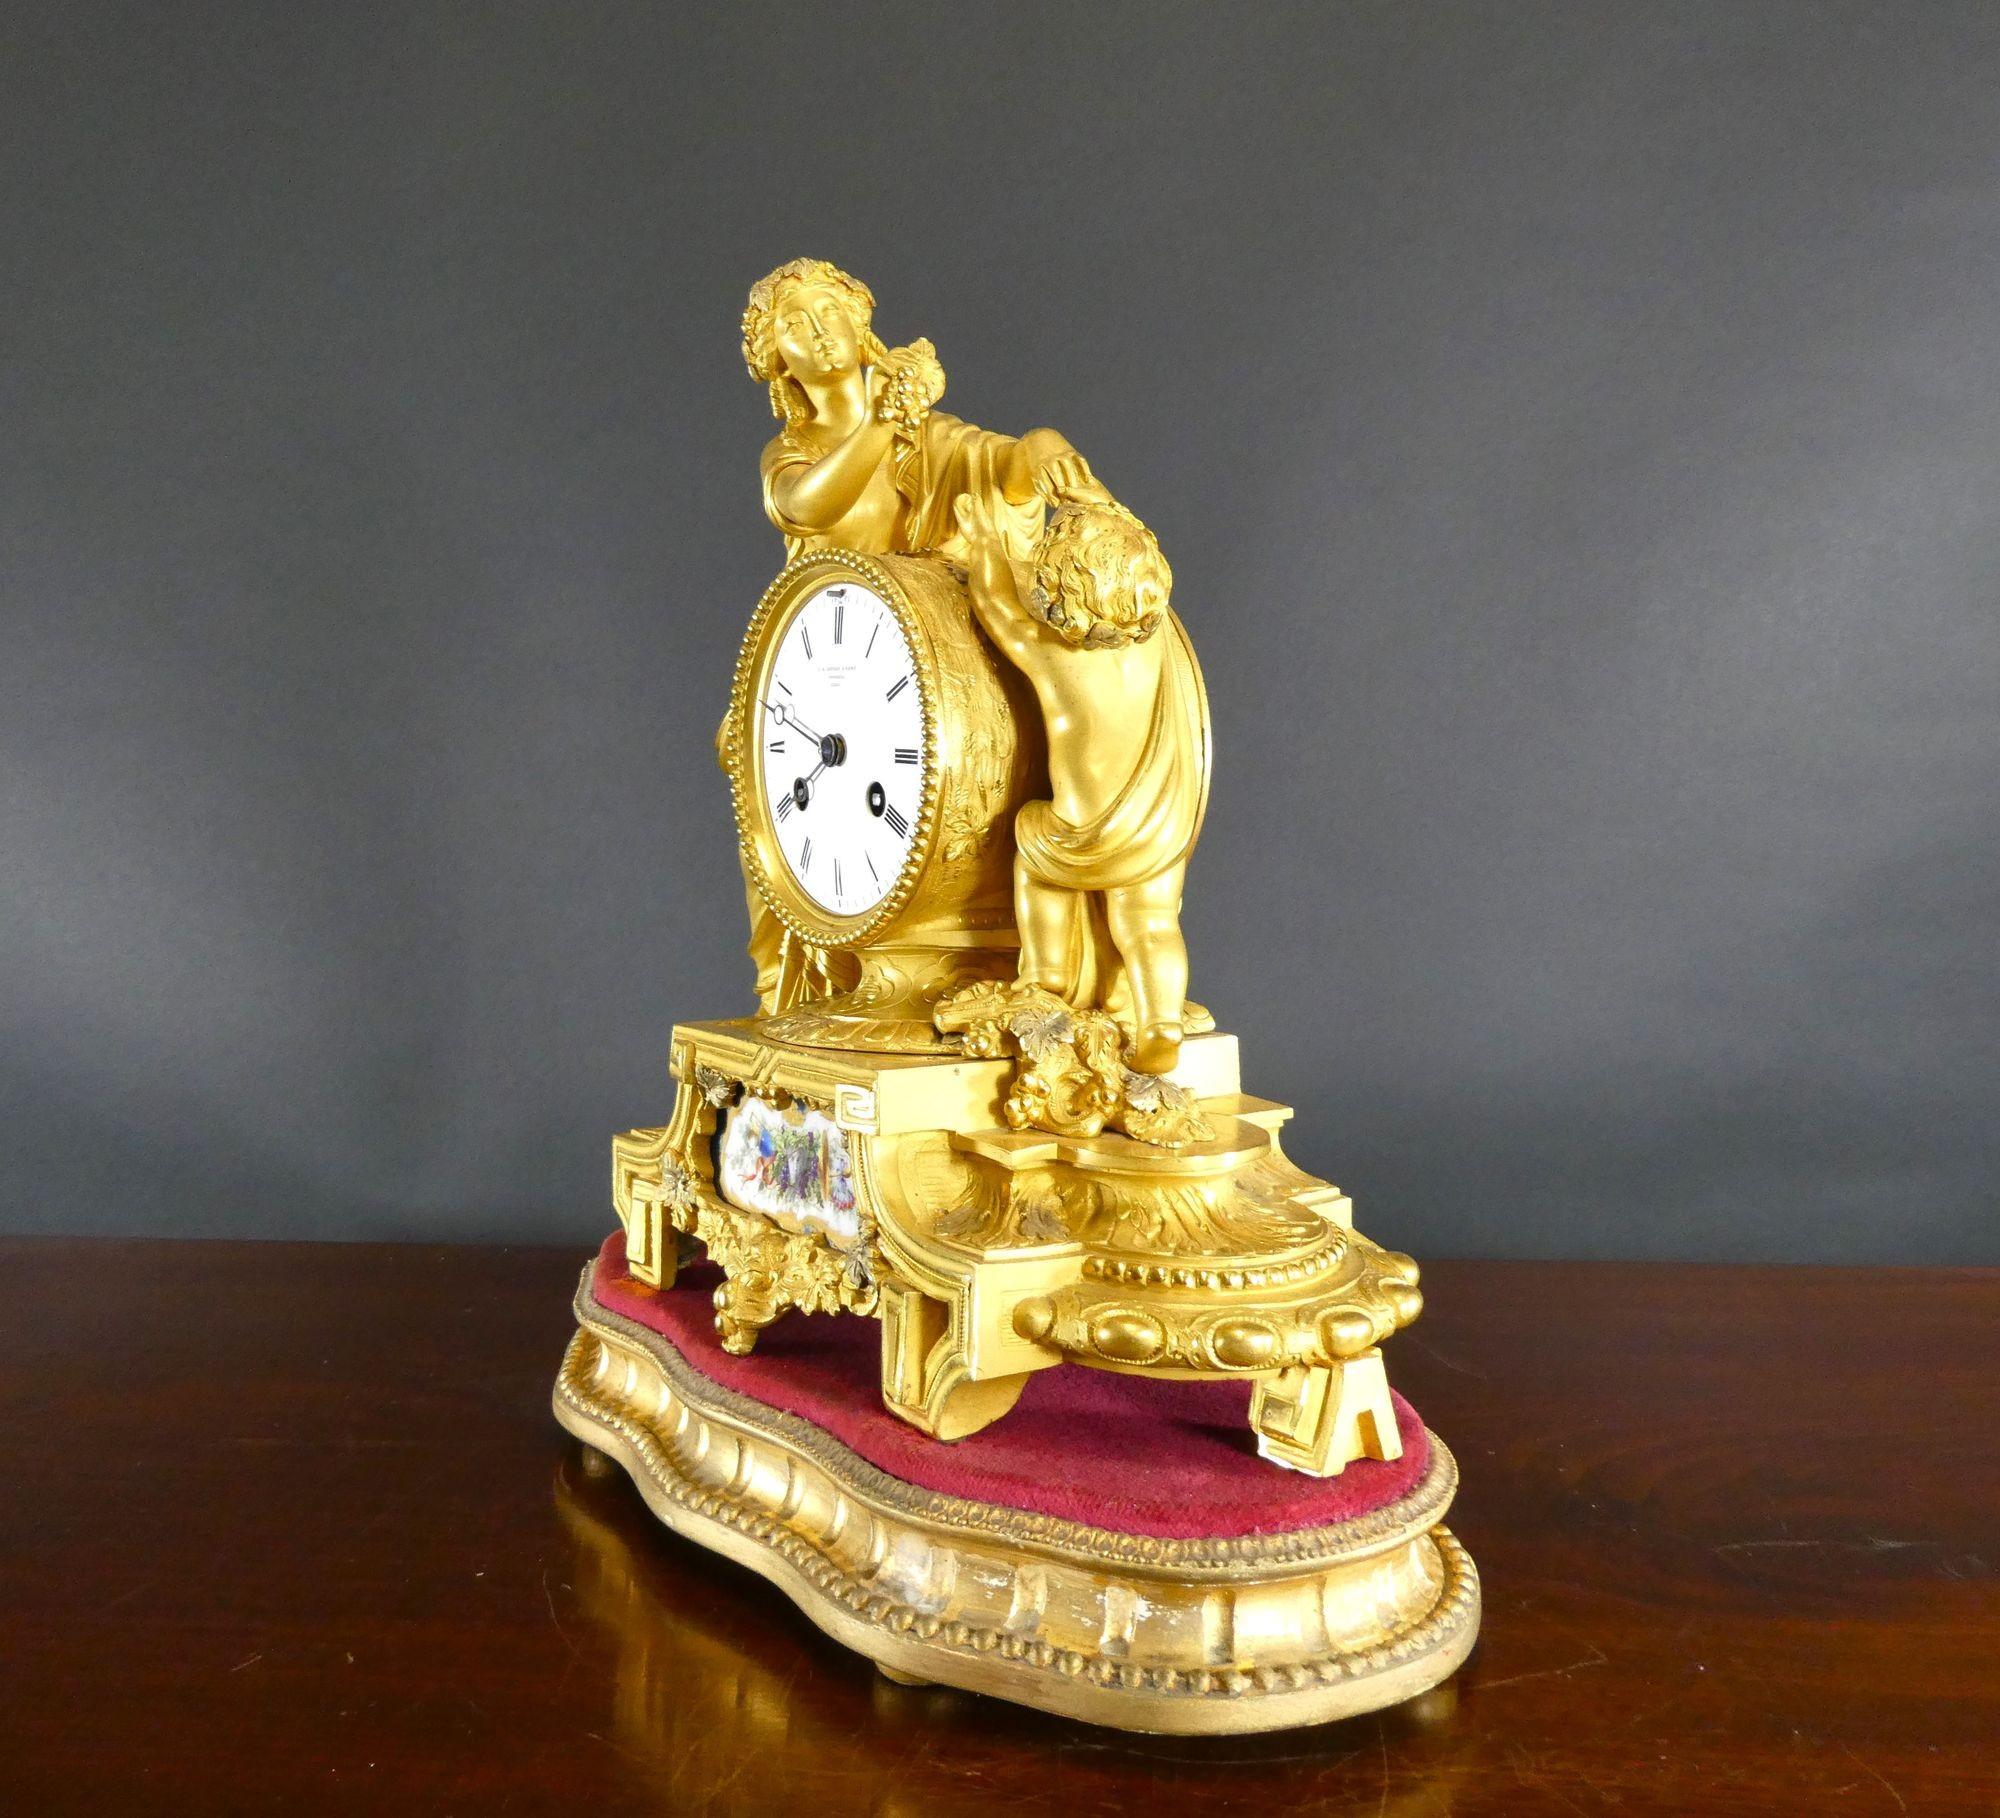 Ormolu and Porcelain Panel Mantel Clock

Ormolu figural mantel clock with beautifully cast maiden in flowing robes holding a bunch of grapes towards a cherub. Fine quality chased ormolu mounts with hand painted porcelain panel to the front. The